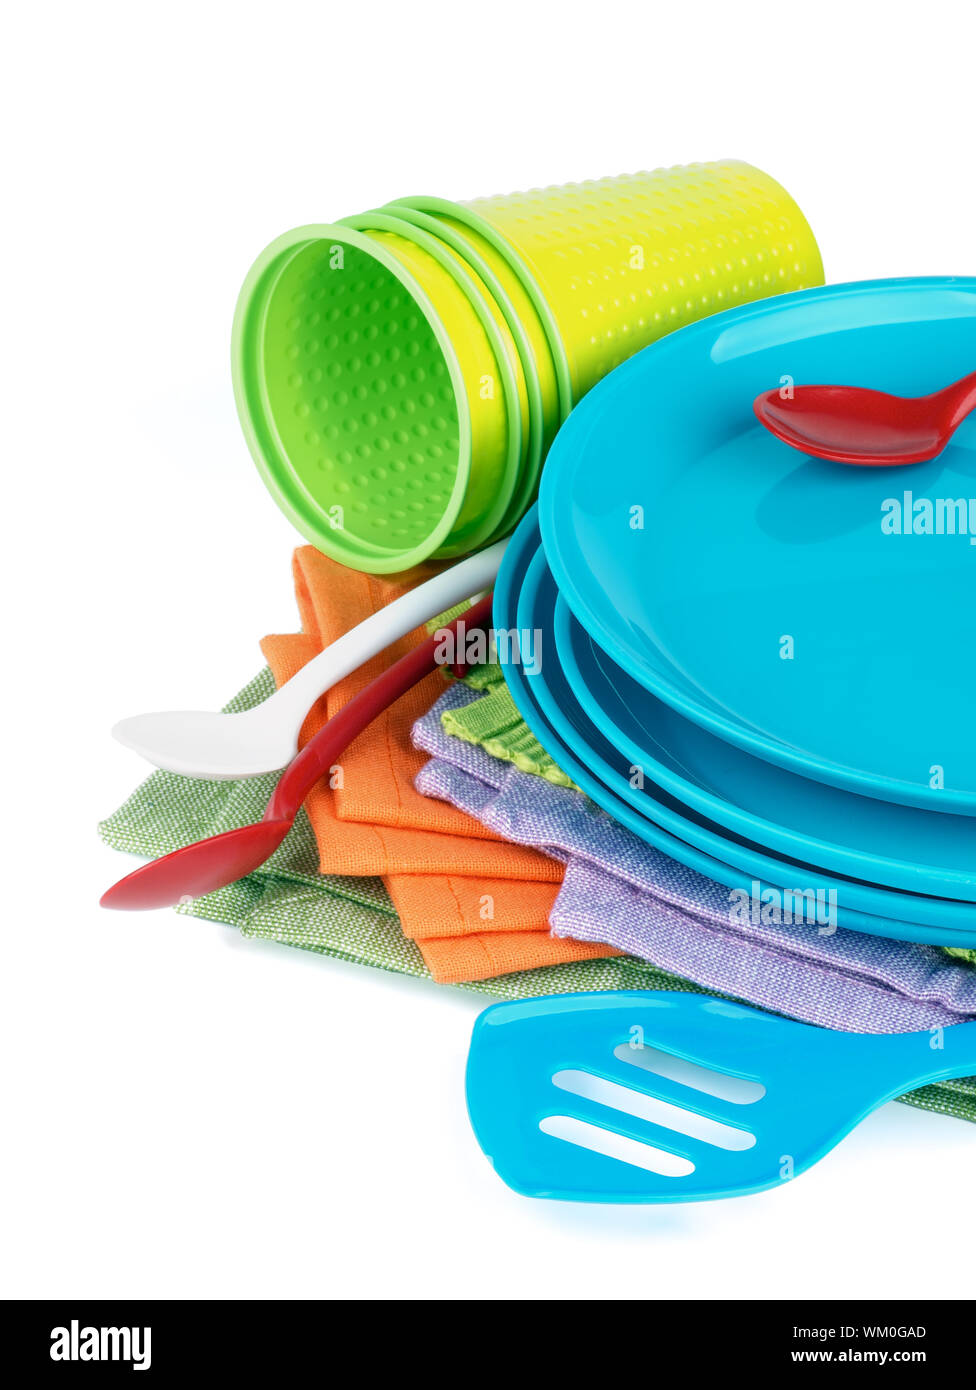 https://c8.alamy.com/comp/WM0GAD/arrangement-of-multi-colored-cloth-napkins-with-plastic-plates-spoons-and-cups-isolated-on-white-background-WM0GAD.jpg